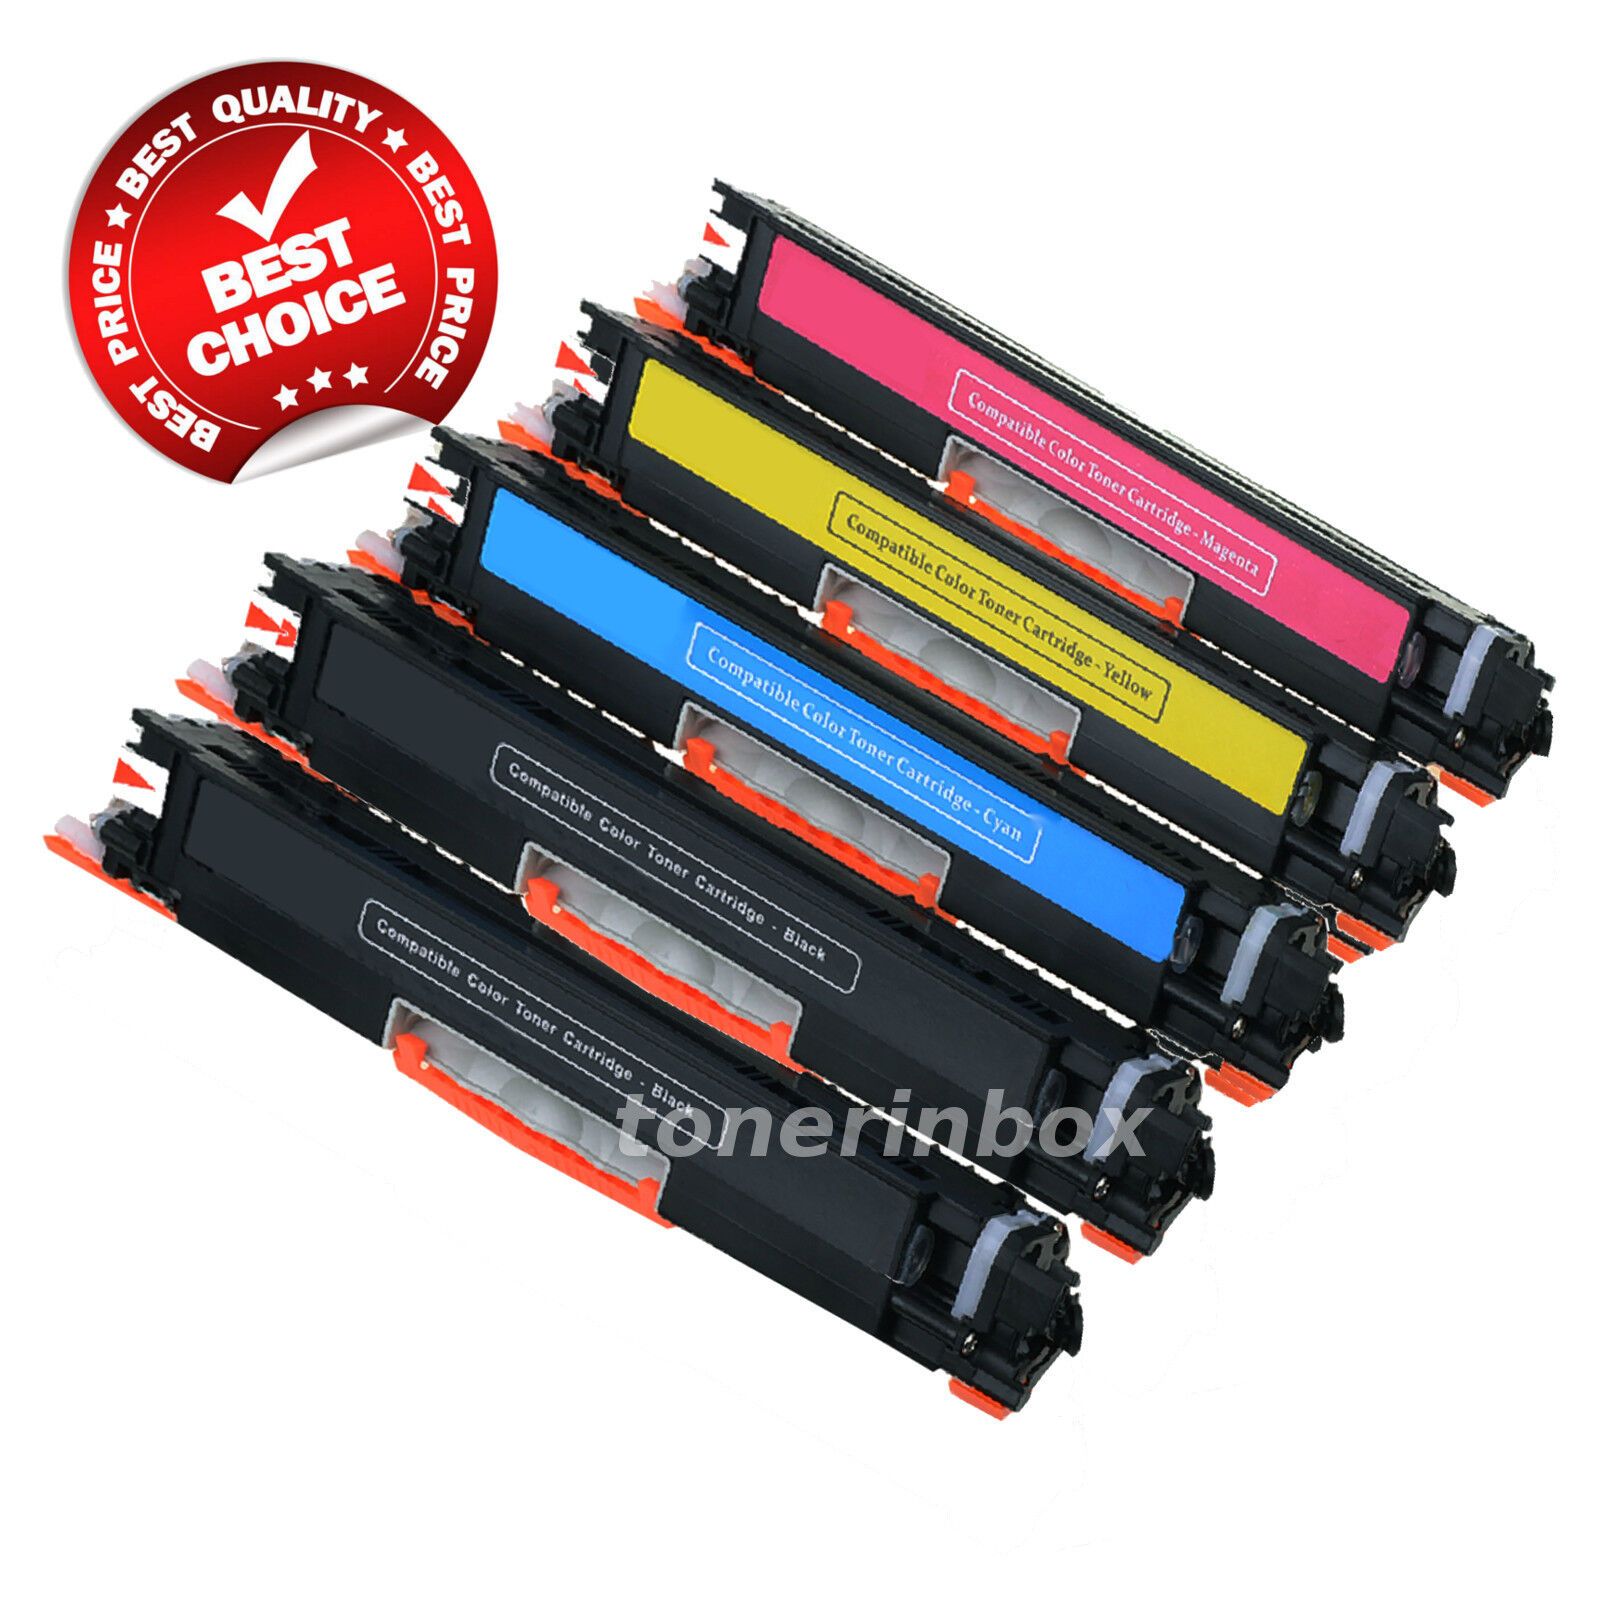 5 pk Generic CE310A CE311A CE312A CE313A Toner For 126A LaserJet CP1025nw M275